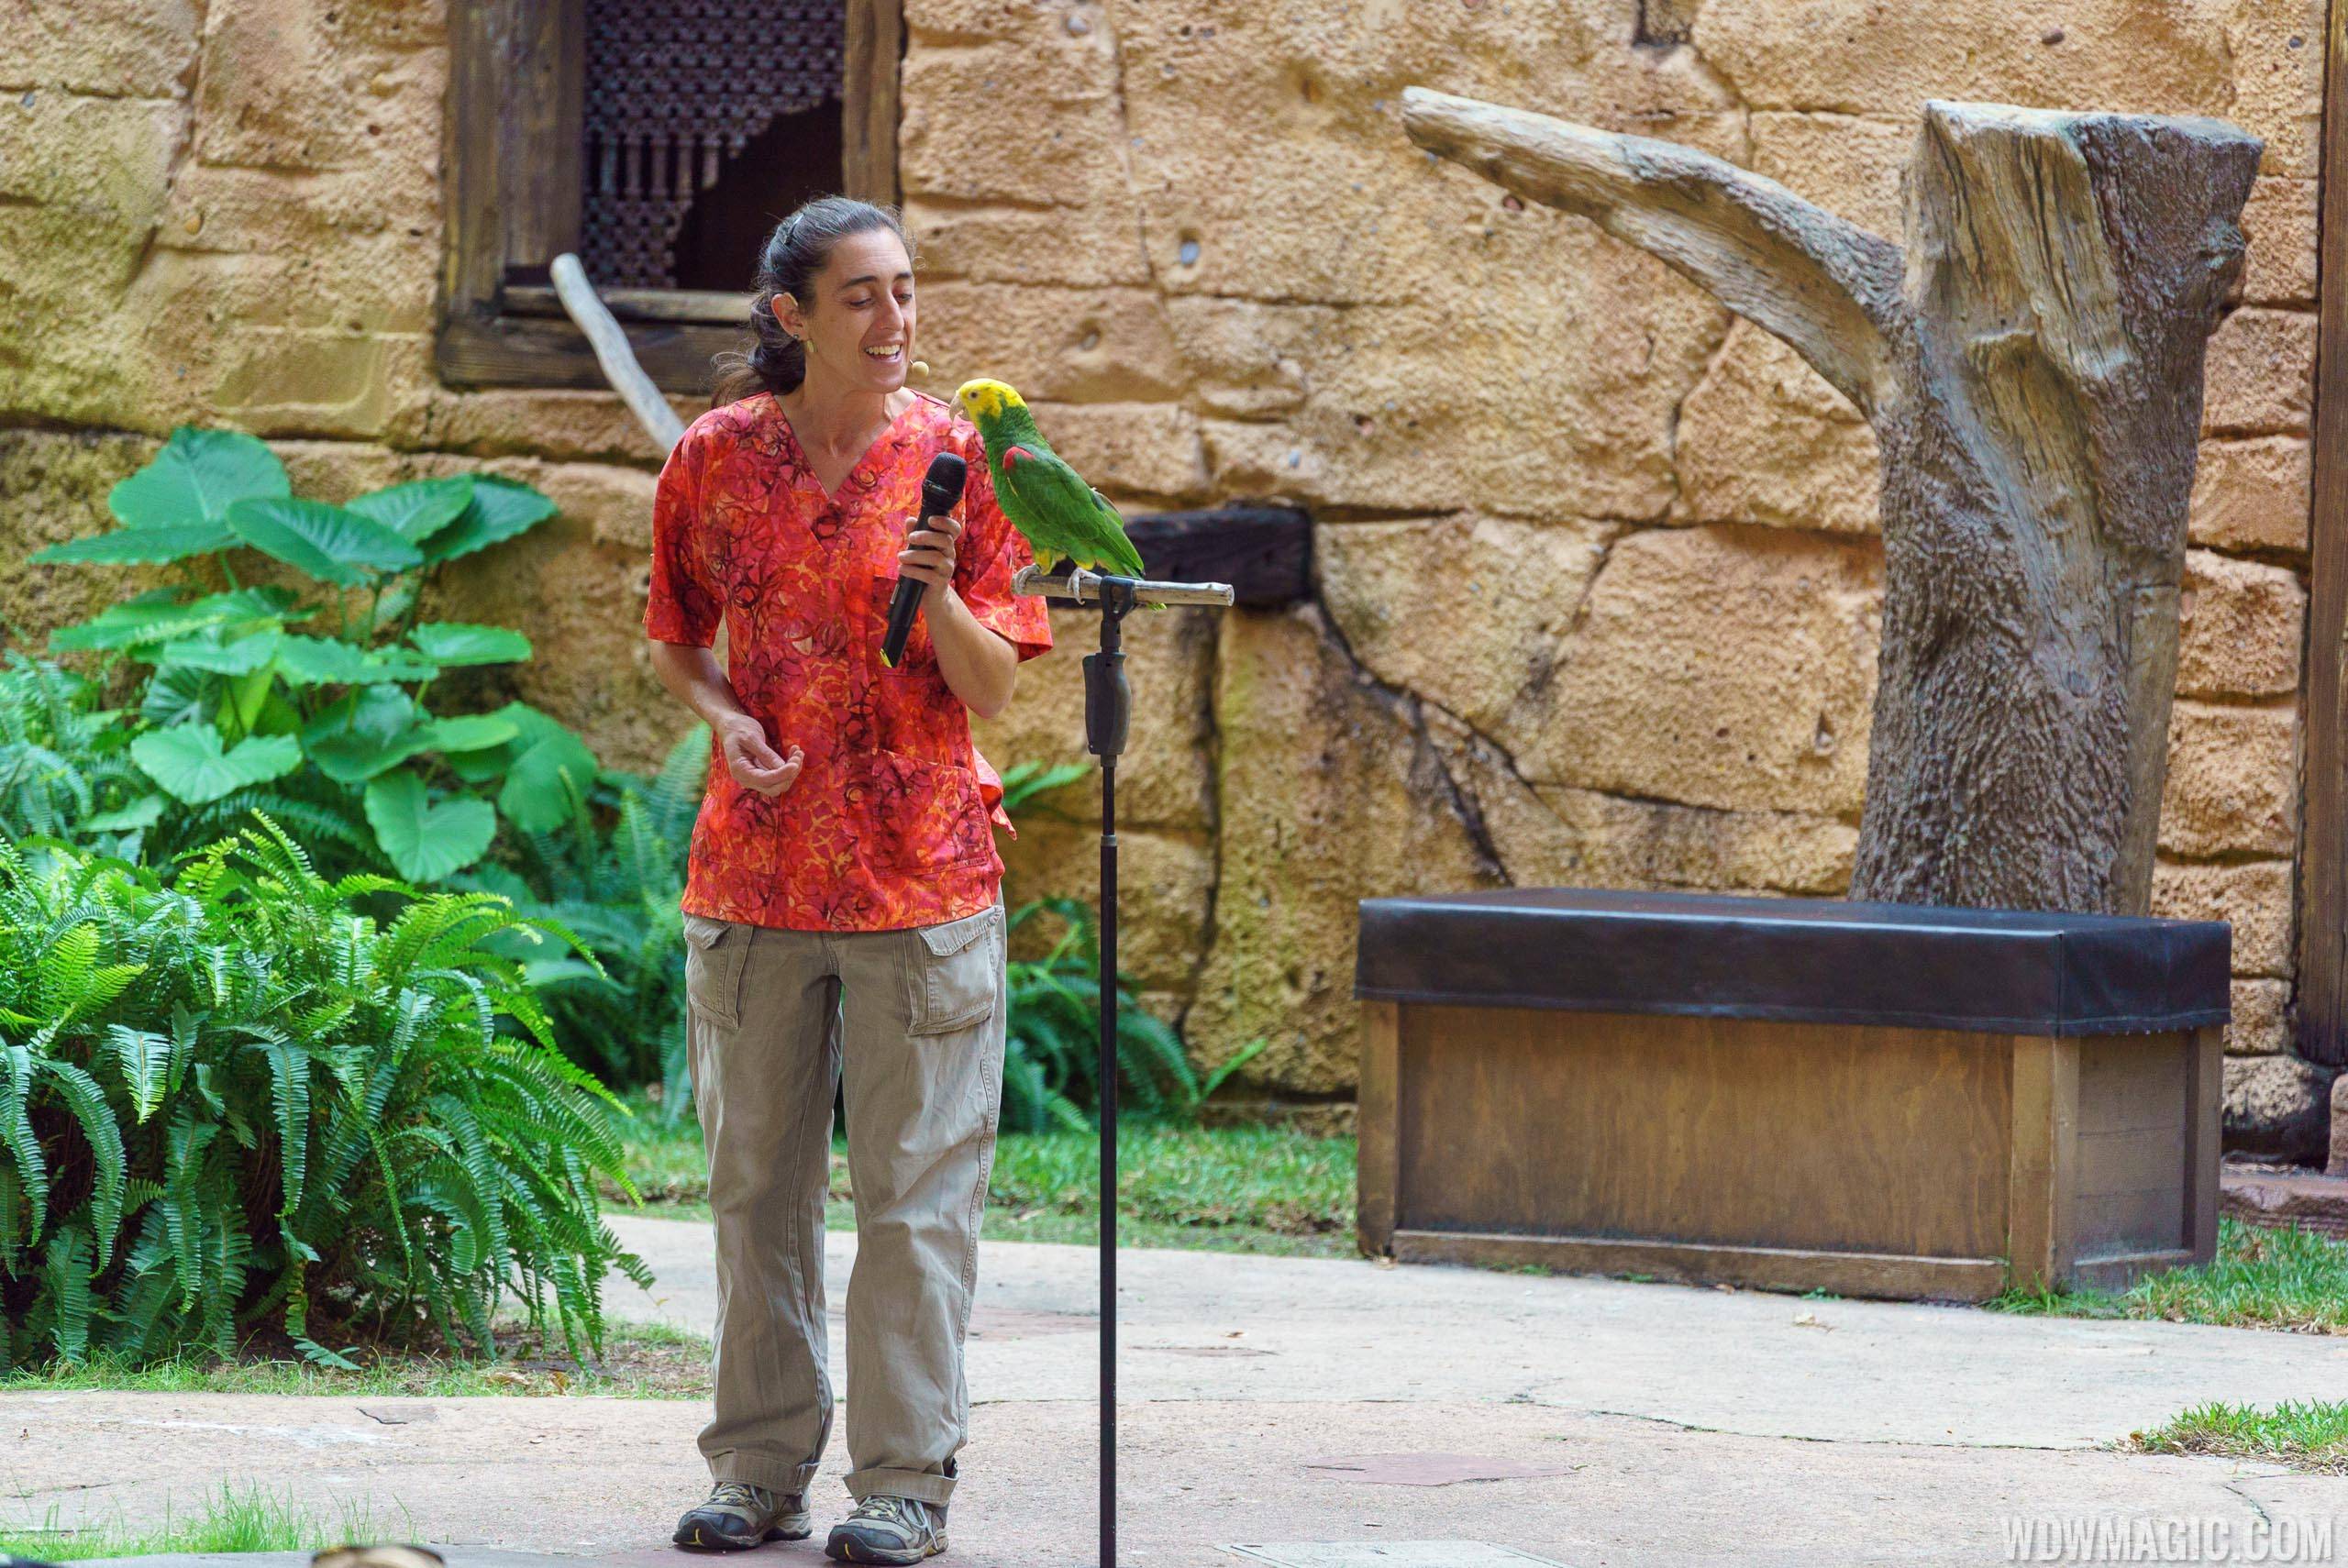 Flights of Wonder at Disney's Animal Kingdom to be added to FastPass+